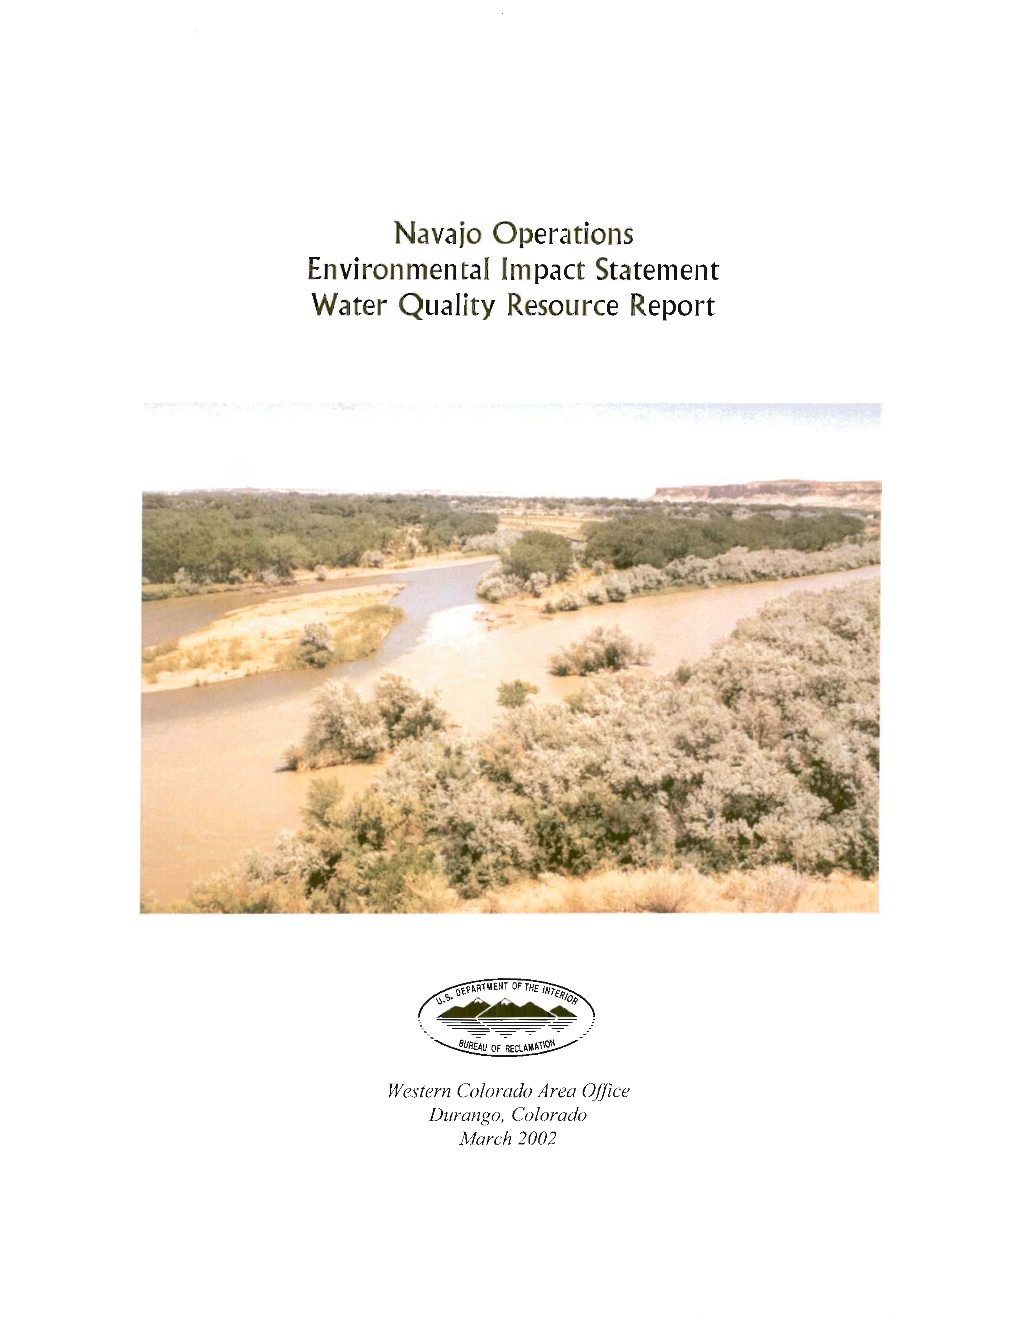 Navajo Operations Environmental Impact Statement Water Quality Report